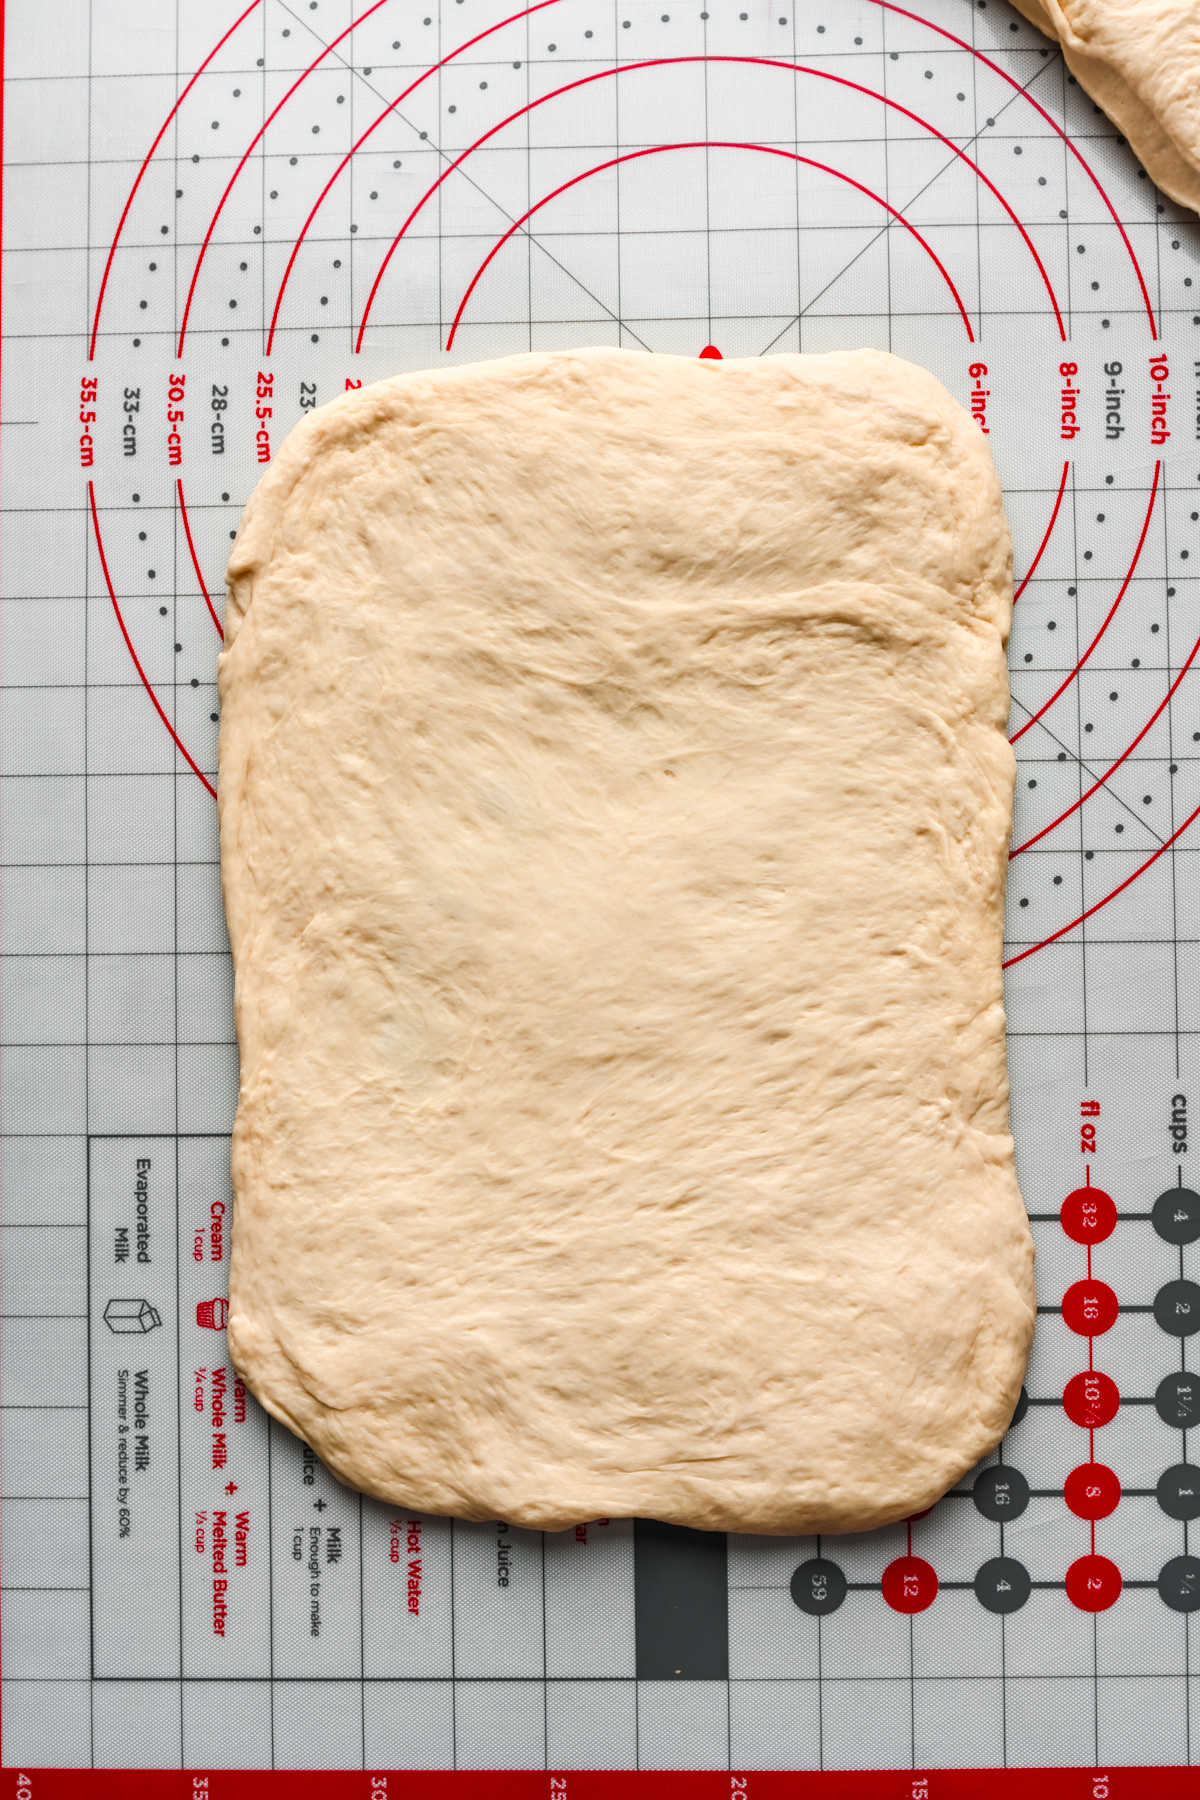 White bread dough rolled into a rectangle on a baking mat.